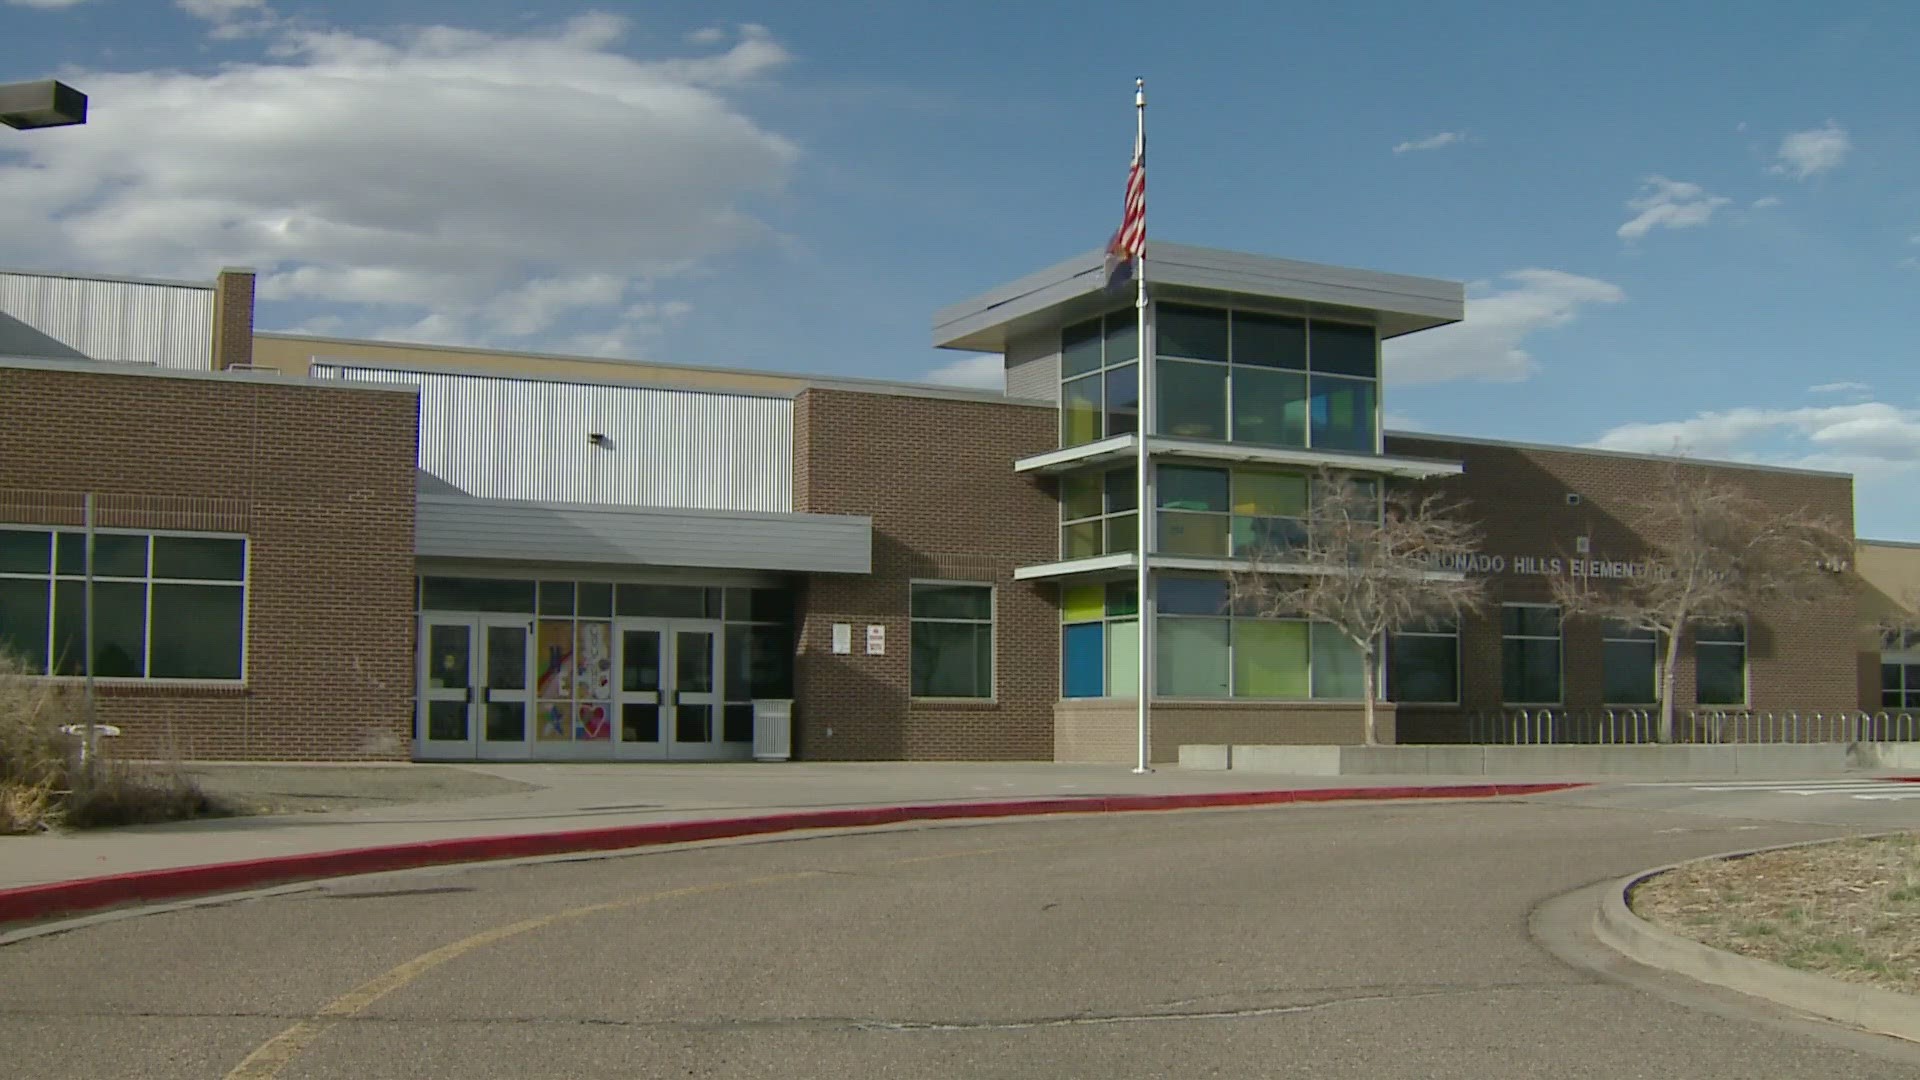 According to the Adams County Sheriff's Office, two suspects shot BBs at the school while the district was on spring break.